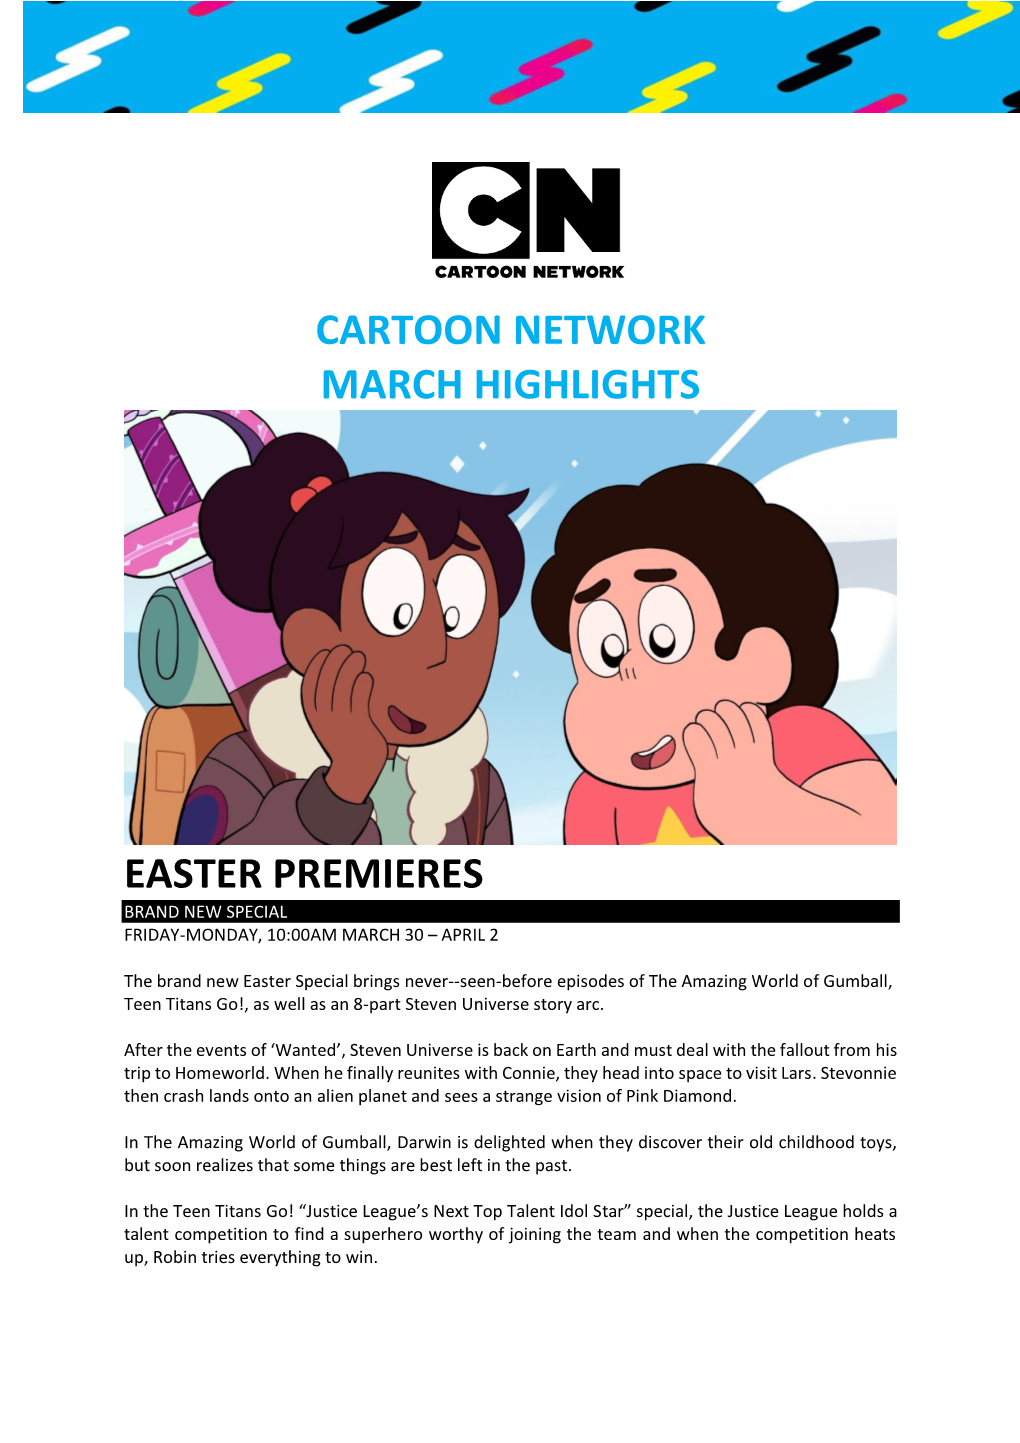 Cartoon Network March Highlights Easter Premieres